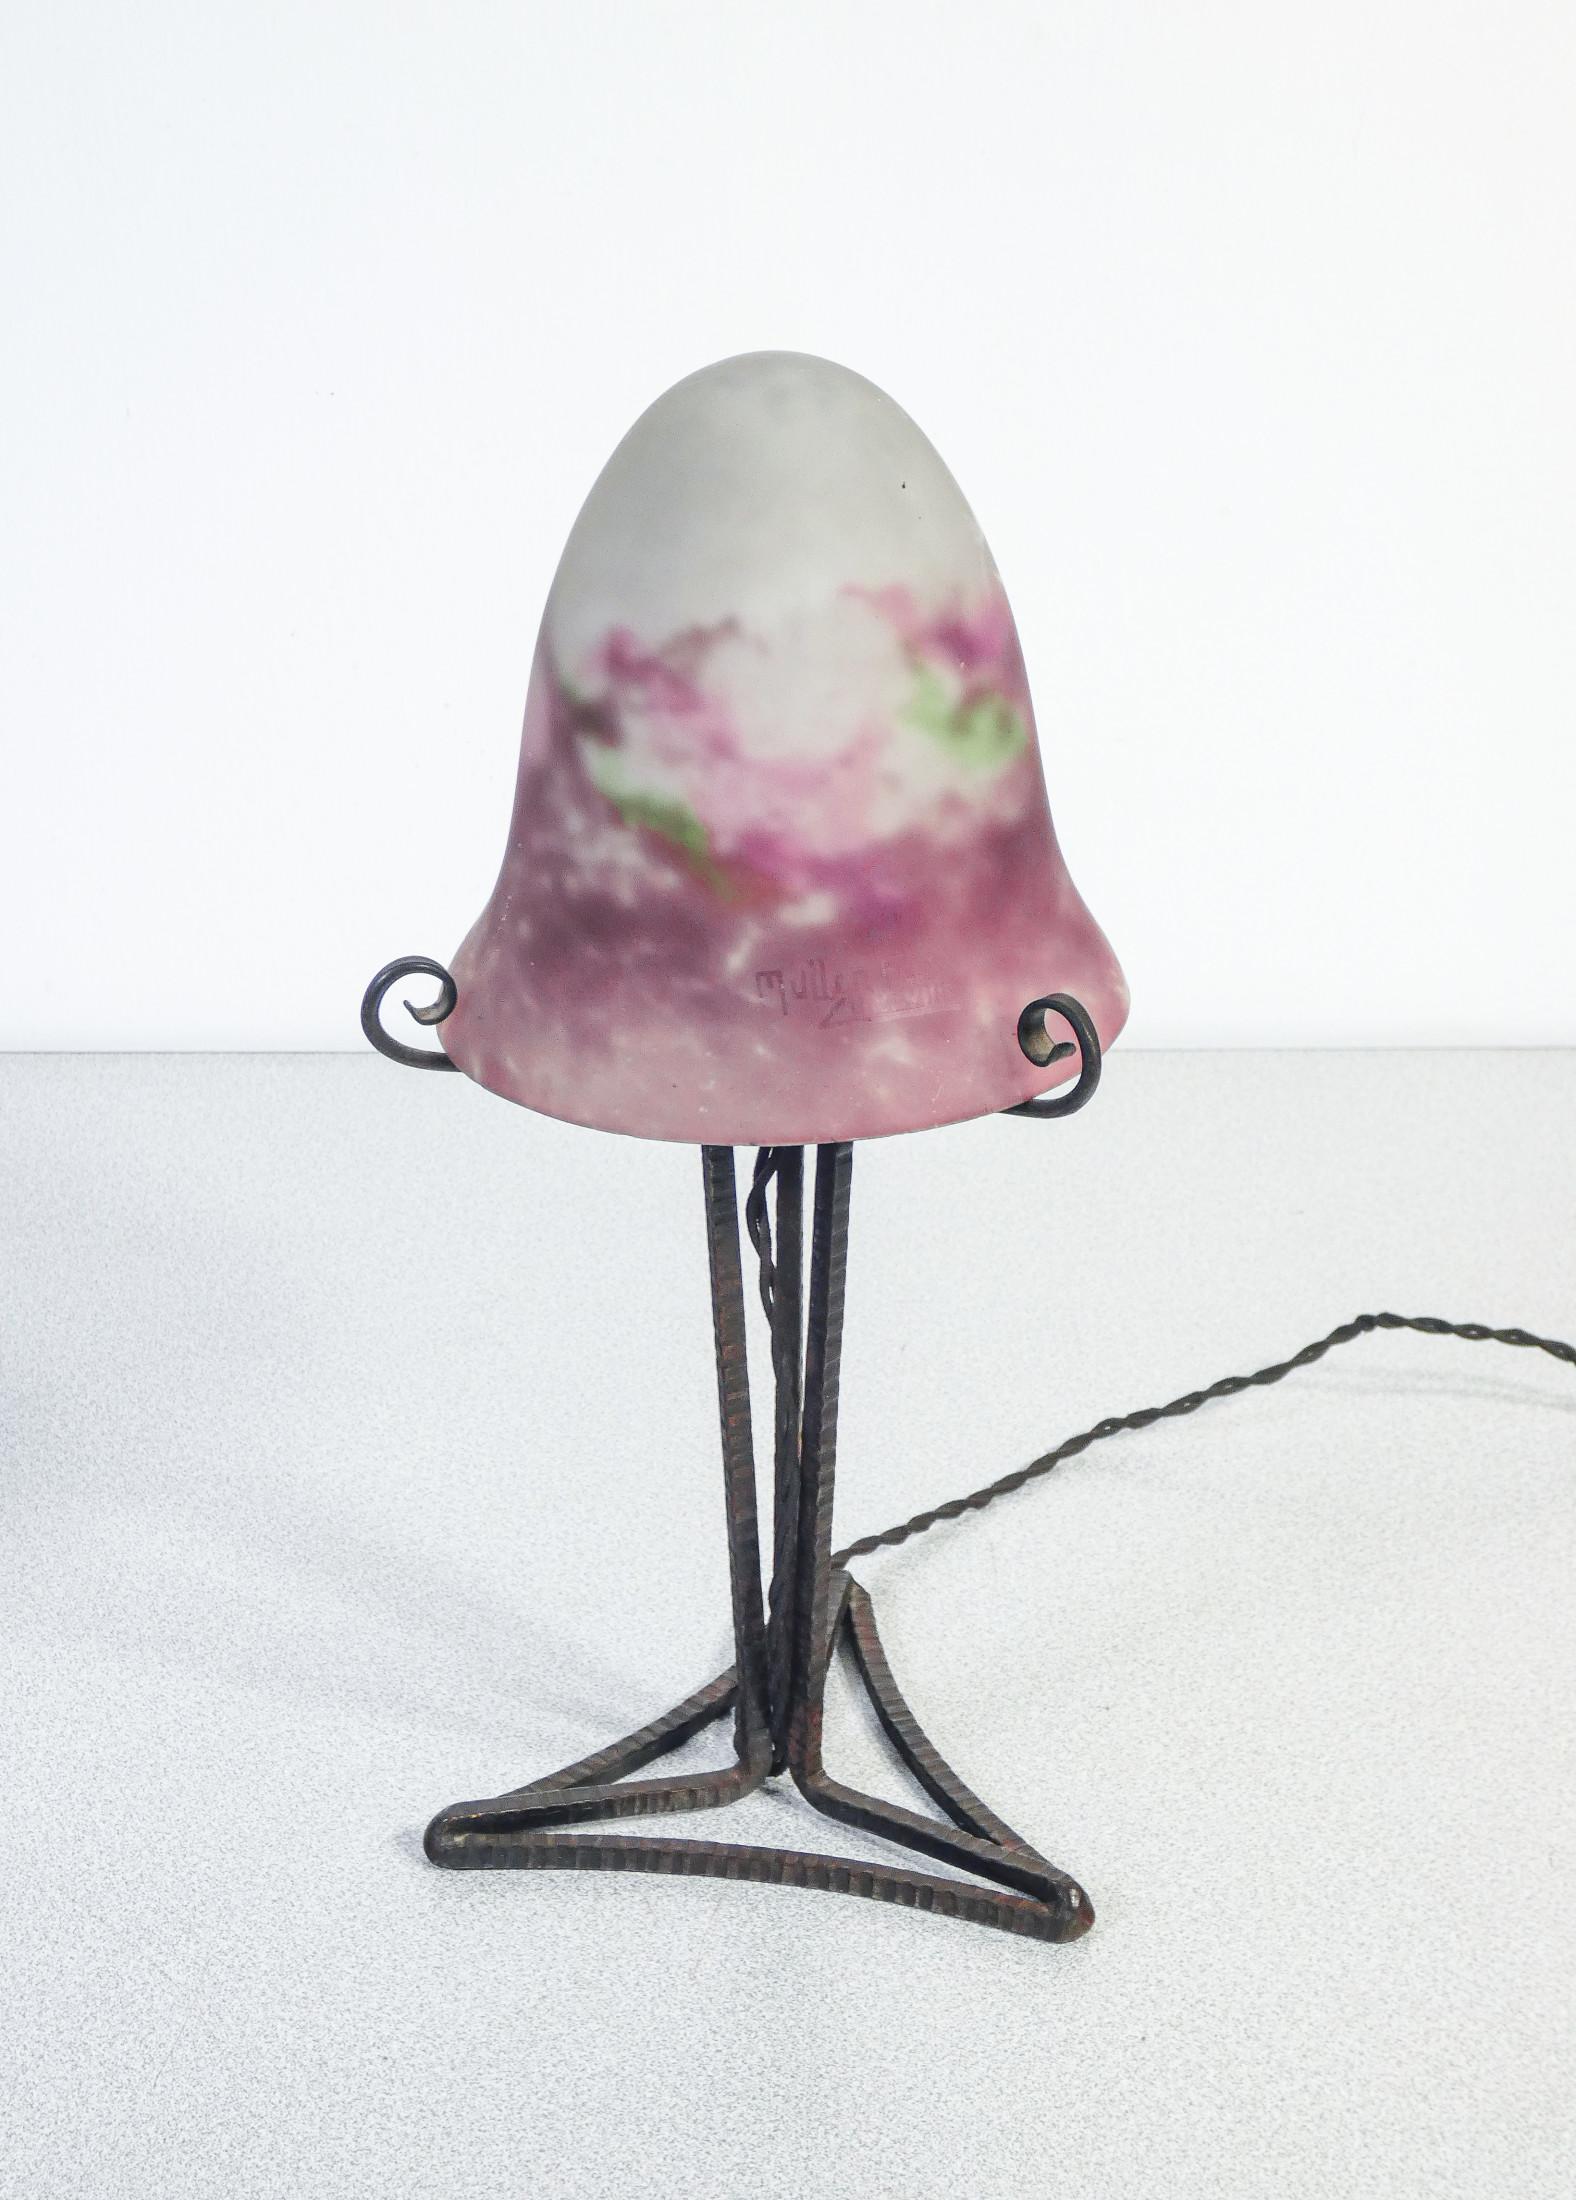 Table lamp
MULLER FRÈRES
Luneville
glass lampshade
blown and base
forged metal.

ORIGIN
France

PERIOD
Years 20/30

MARK
MULLER FRÈRES
Luneville
acid signature
on the lampshade

MATERIALS
Double-layer blown glass lampshade with colored pigment